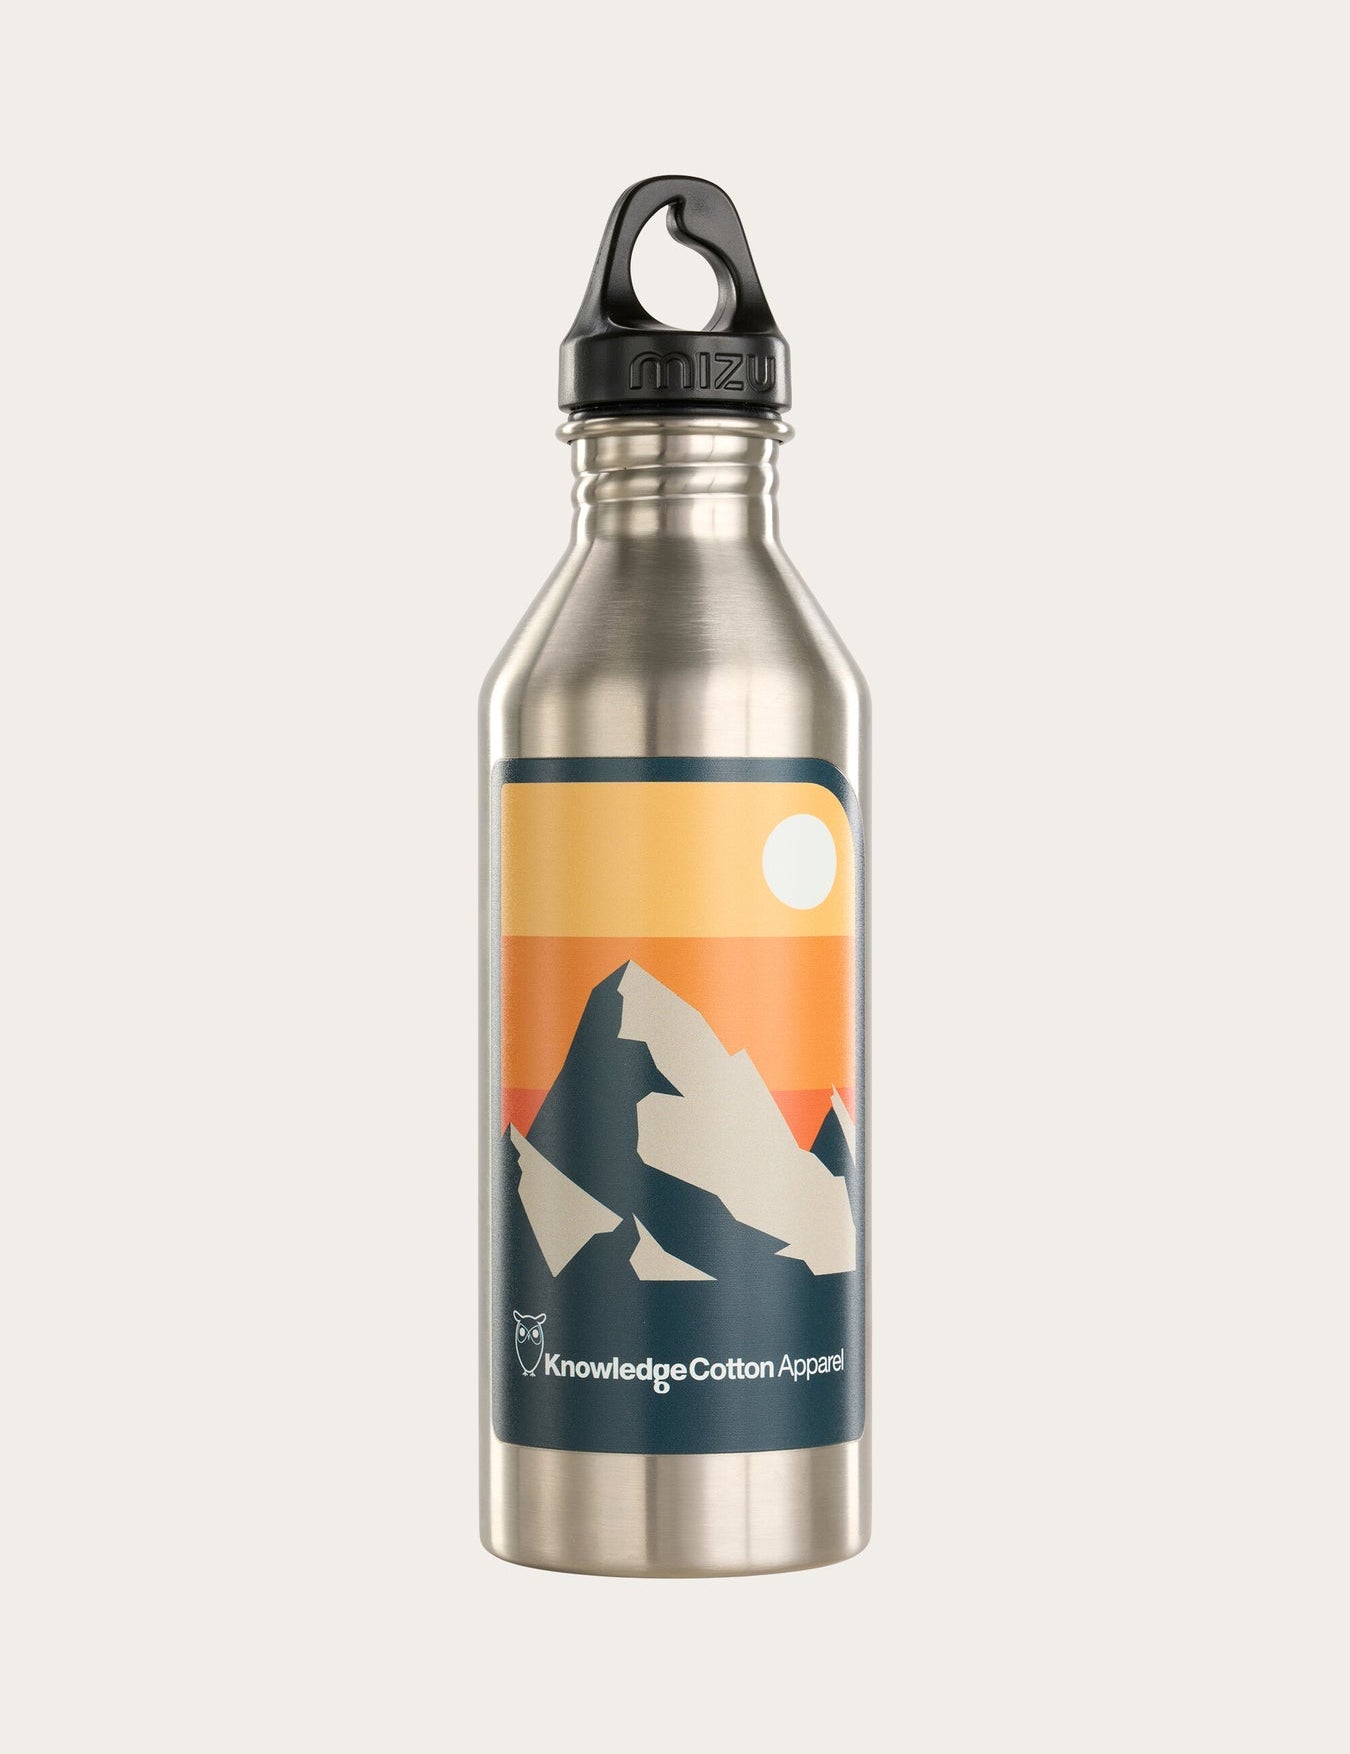 Stainless_steel_water_bottle-Accessories-82341-9999_Item_Colour_1350x1800_14e62ac4-379c-427f-b569-a78ebebc34a5.jpg